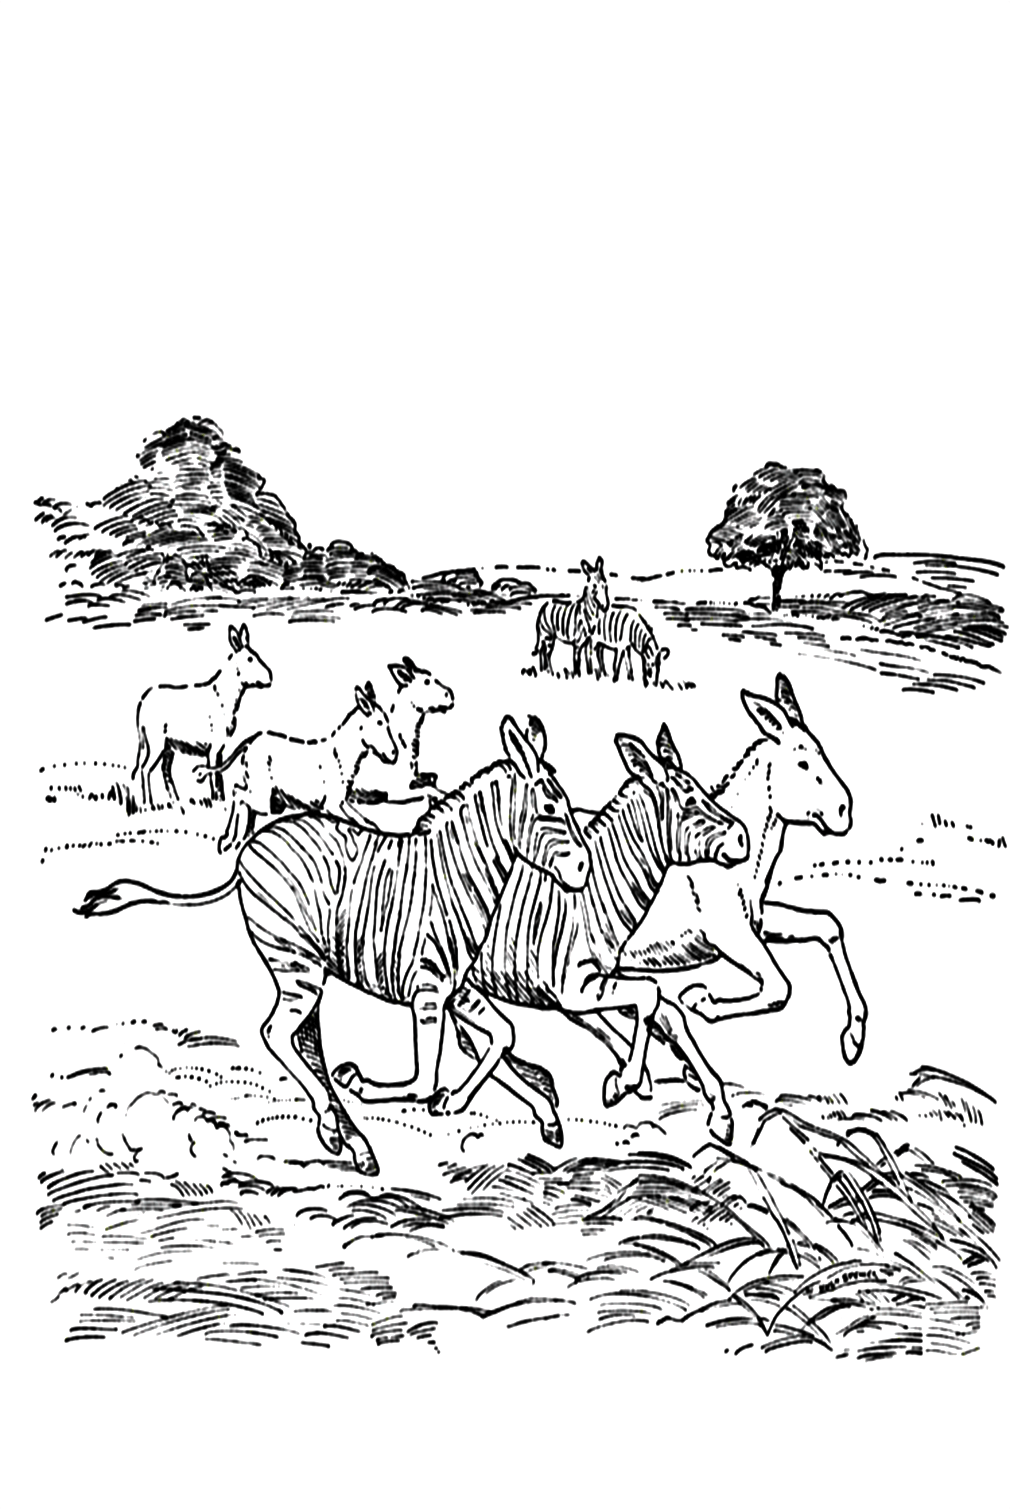 Zebra And The Horses Run Together Coloring Page